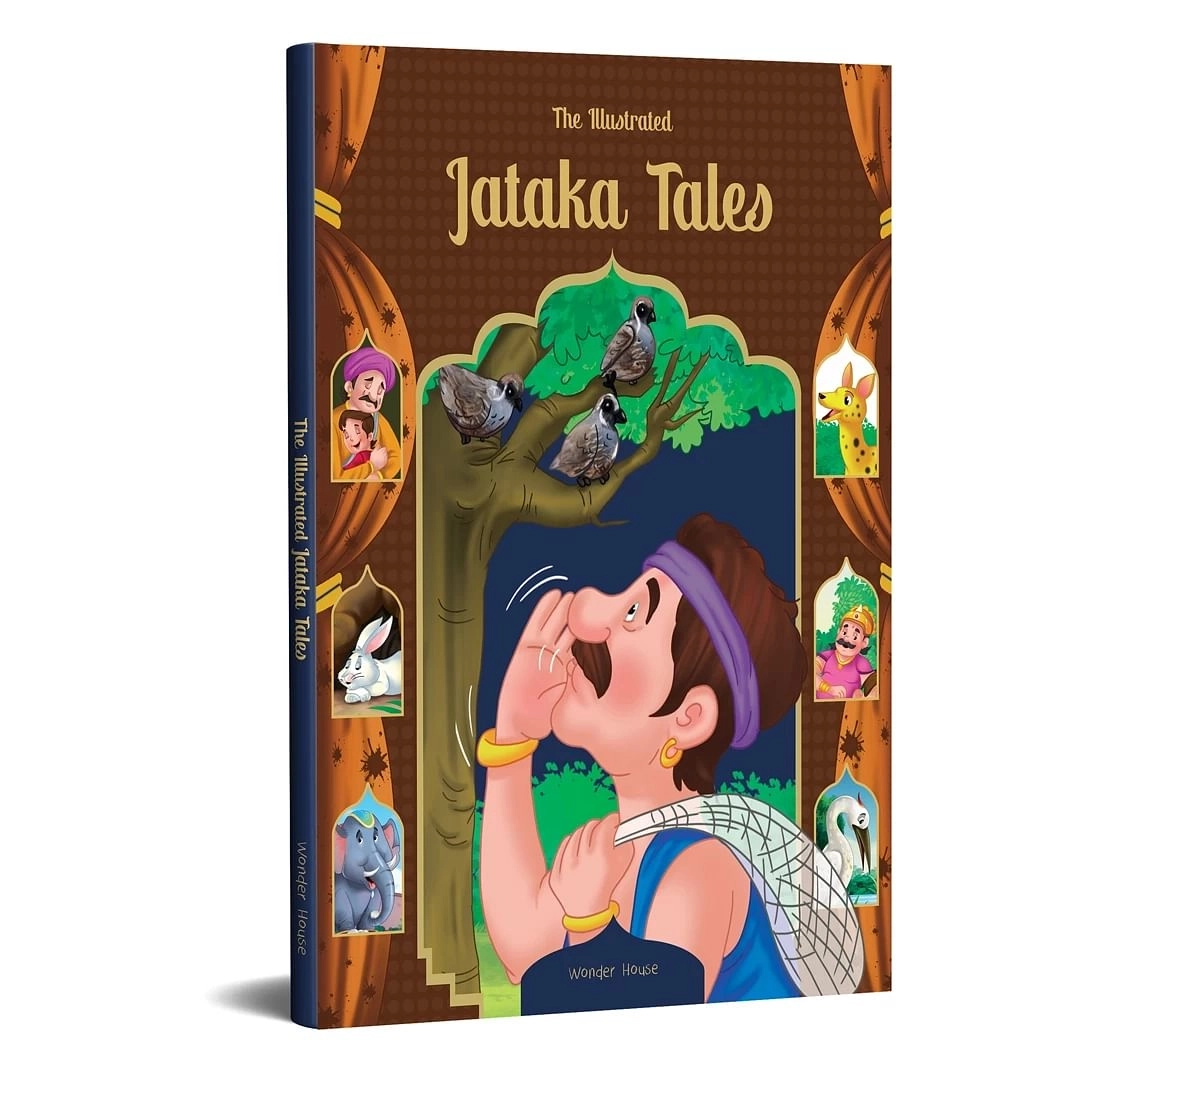 Wonder House Books the Illustrated Jataka Tales Classic Book From India for kids 5Y+, Multicolour